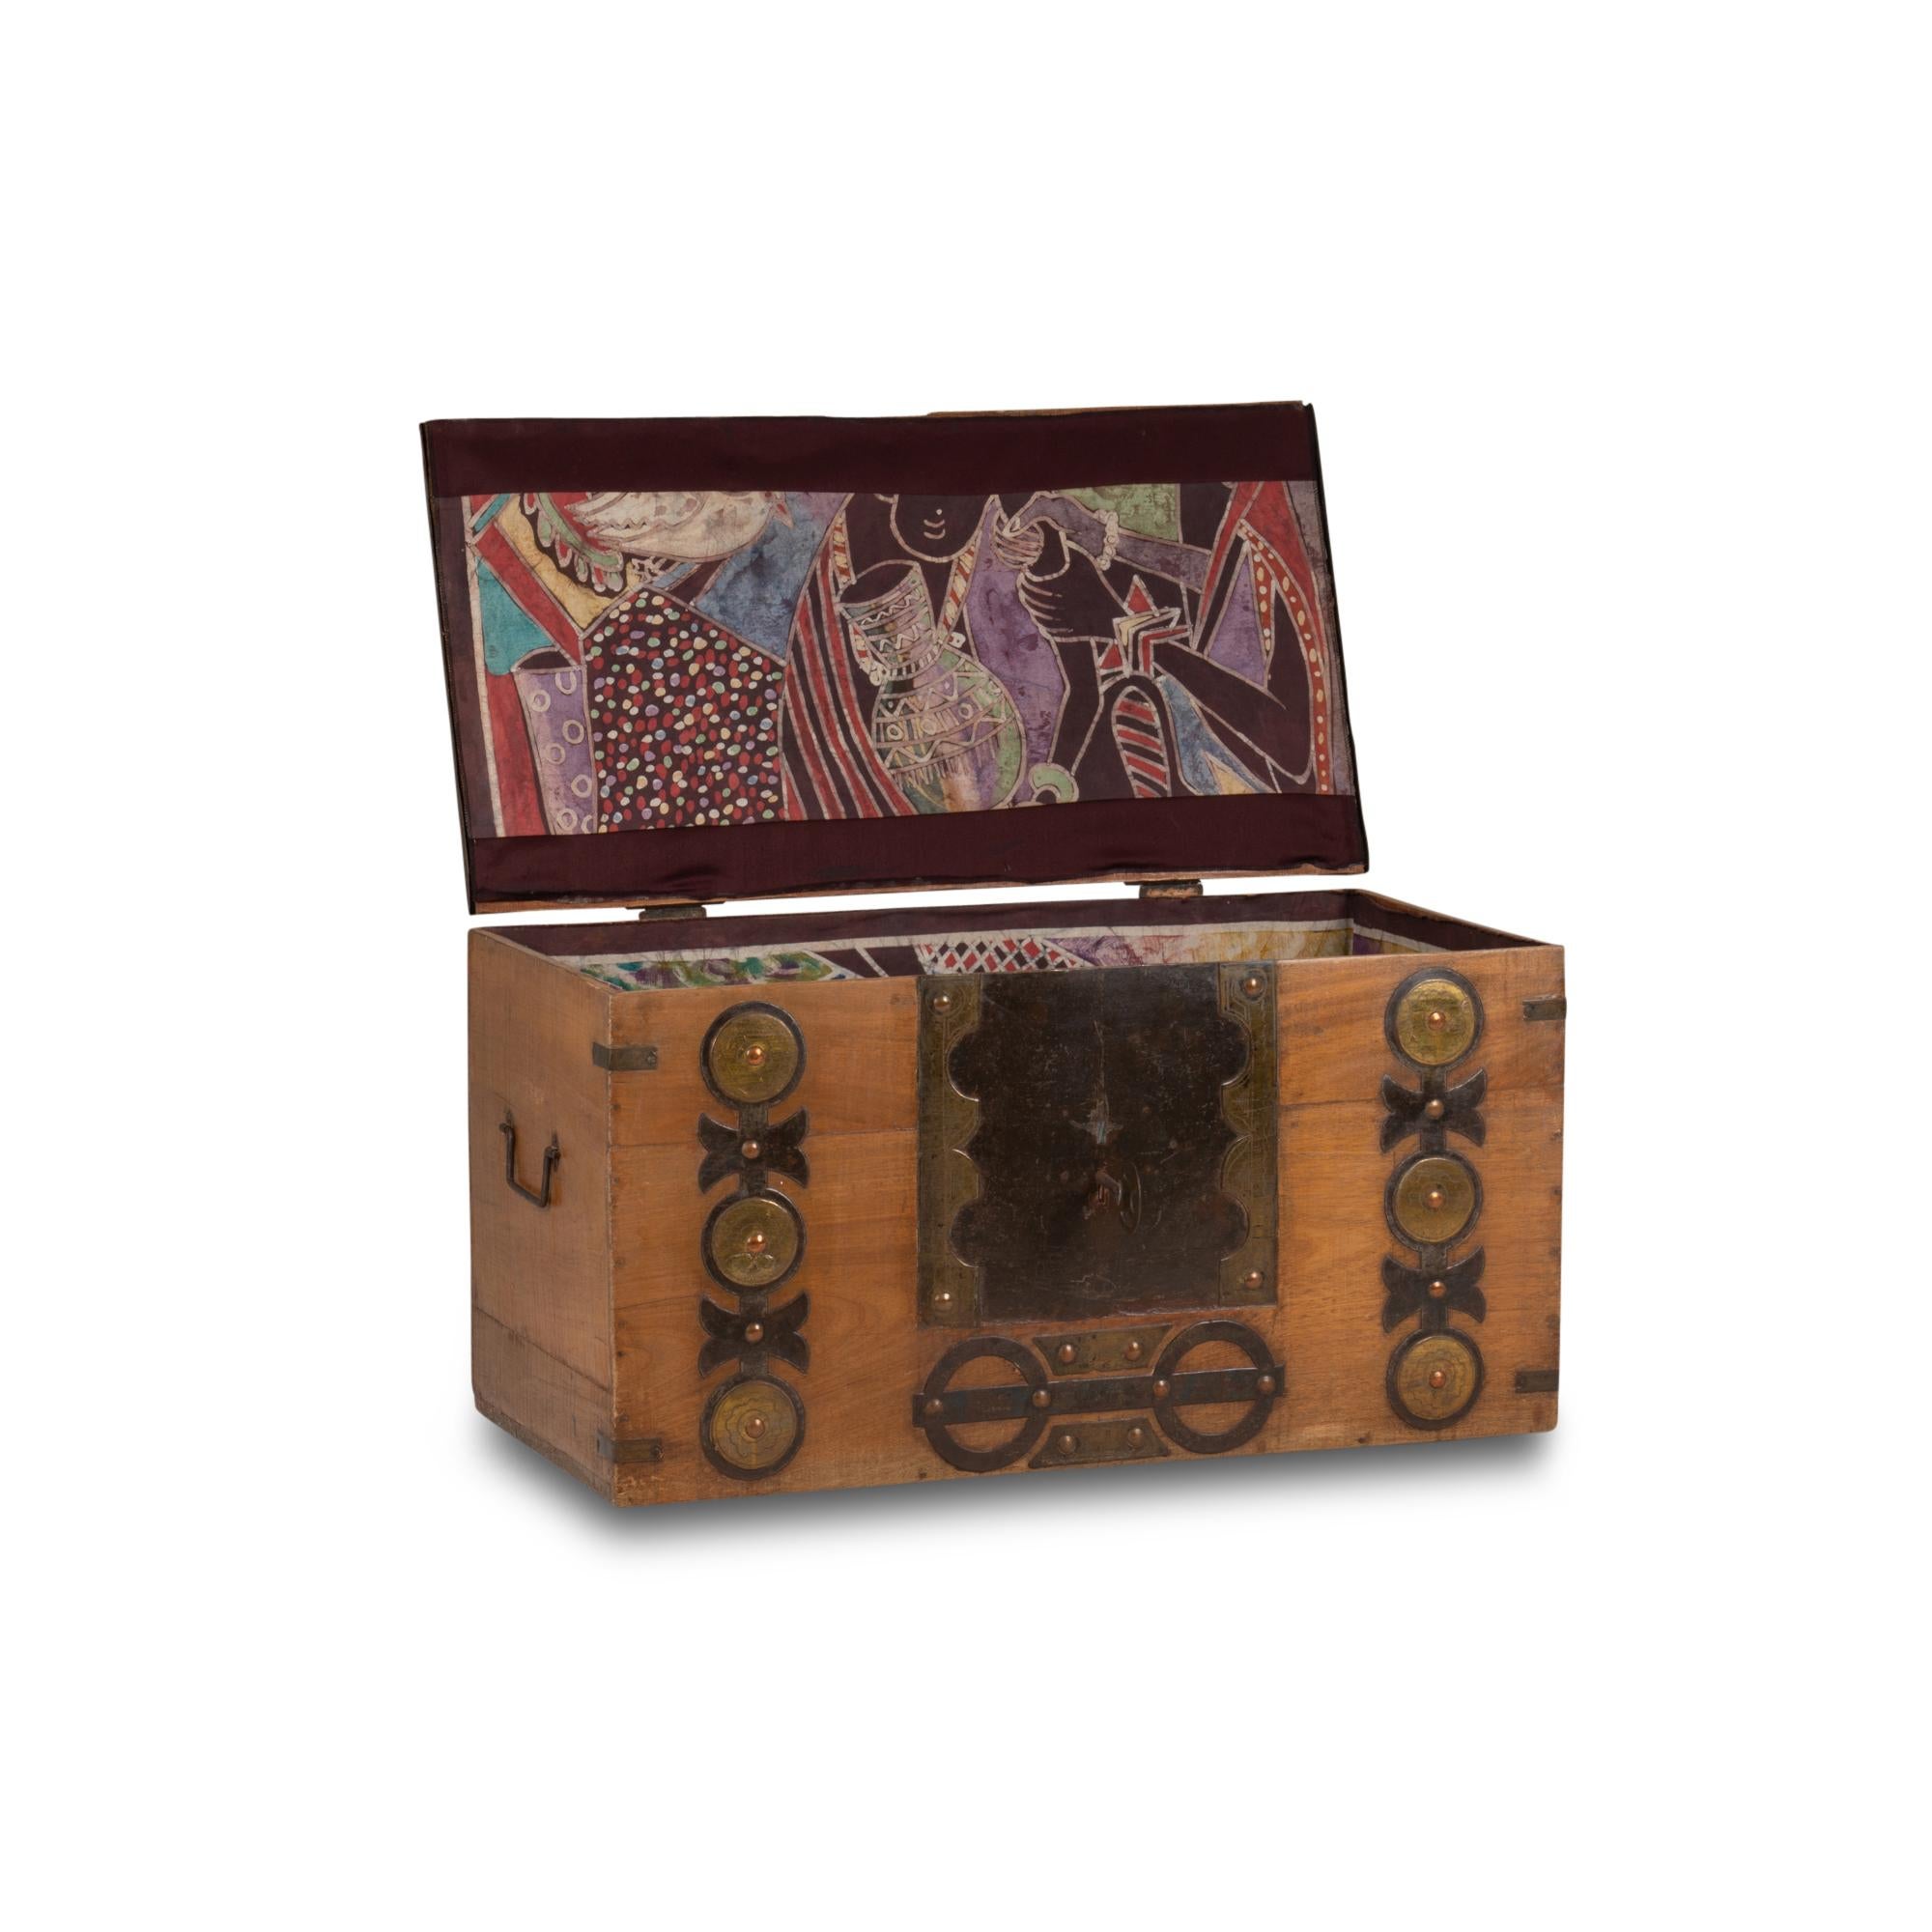 African style wooden chest, rectangular in shape, decorated with metal plates and monks. Folk art.

Work realized in the 20th century.